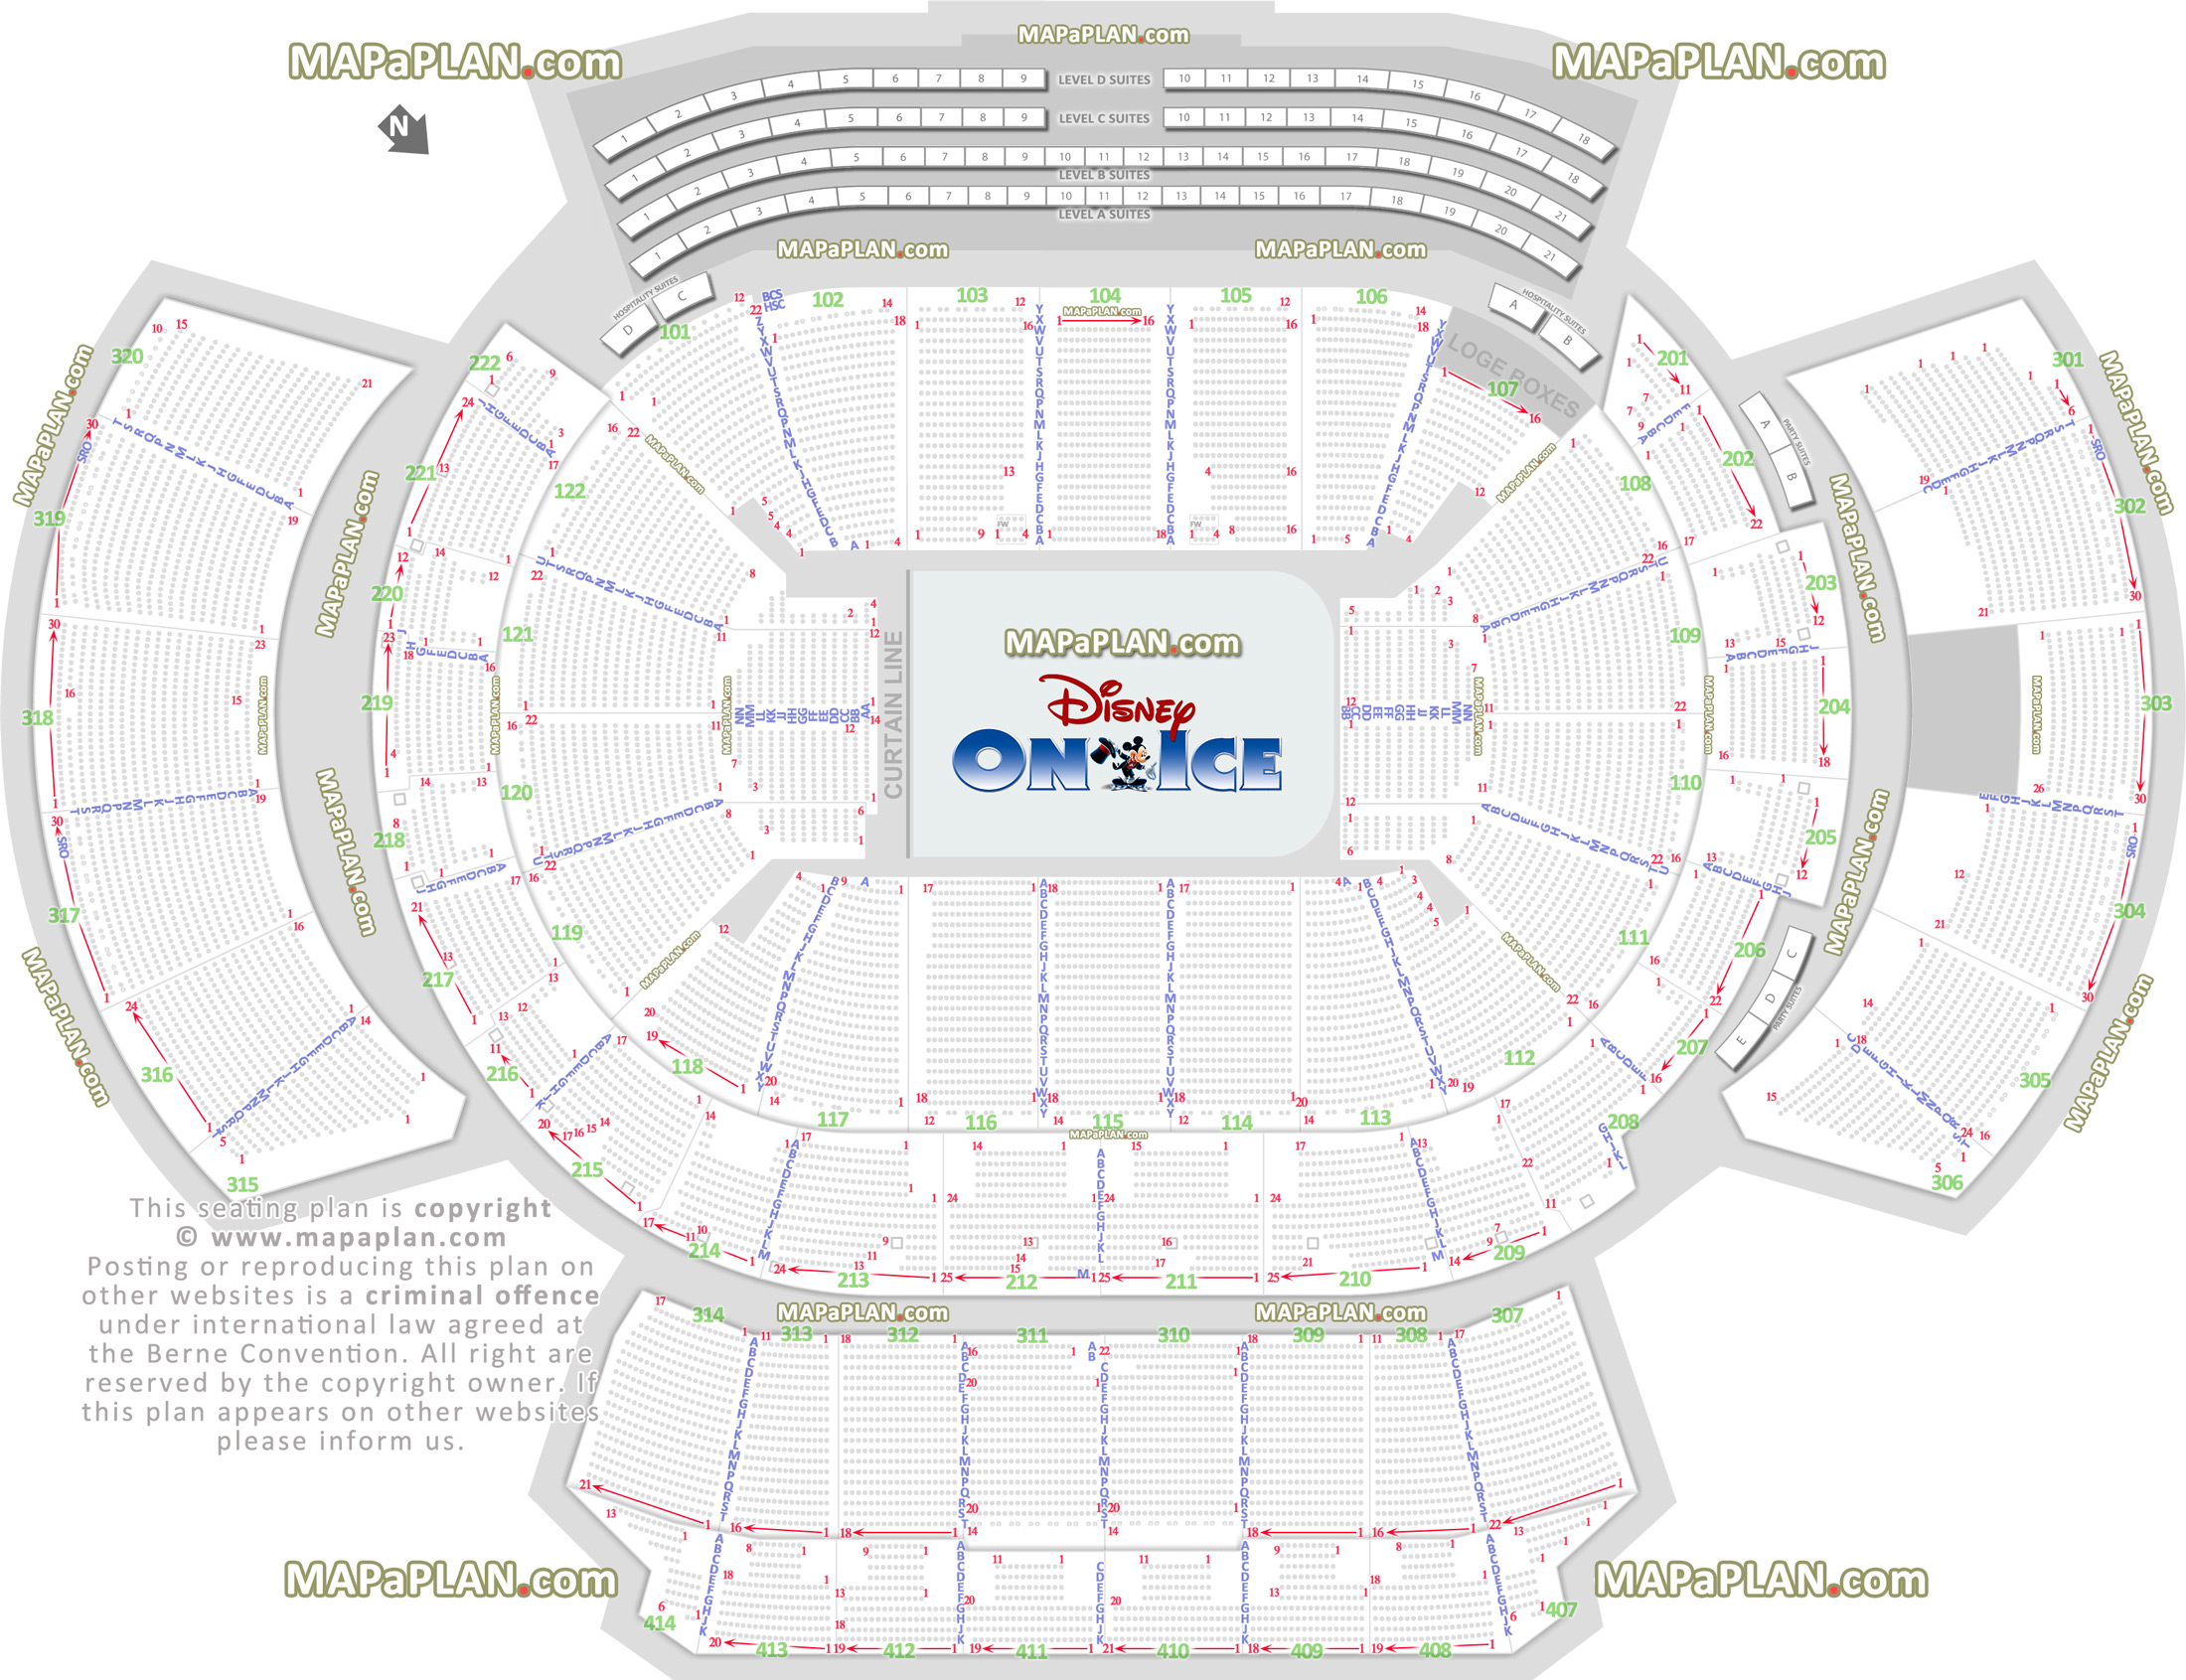 disney ice show mezzanine terrace seating arrangement review diagram best seat finder chart precise aisle numbering location data Atlanta Philips Arena seating chart